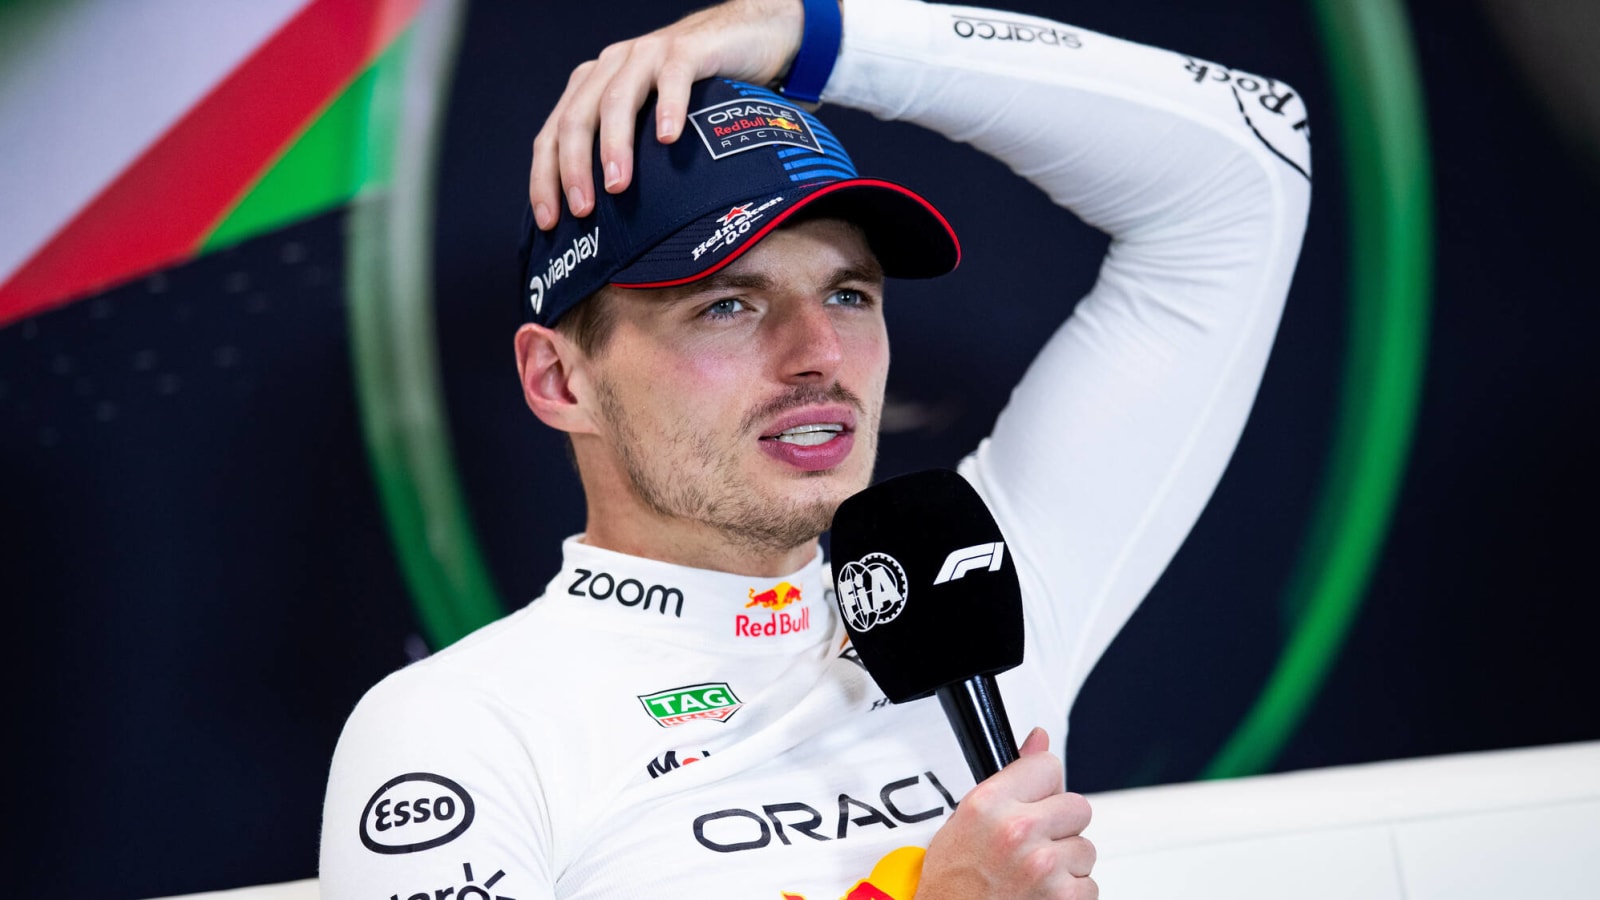 McLaren claims Max Verstappen has an ‘enviable consistency’ in race starts after the Dutchman defeated Lando Norris at Emilia Romagna GP